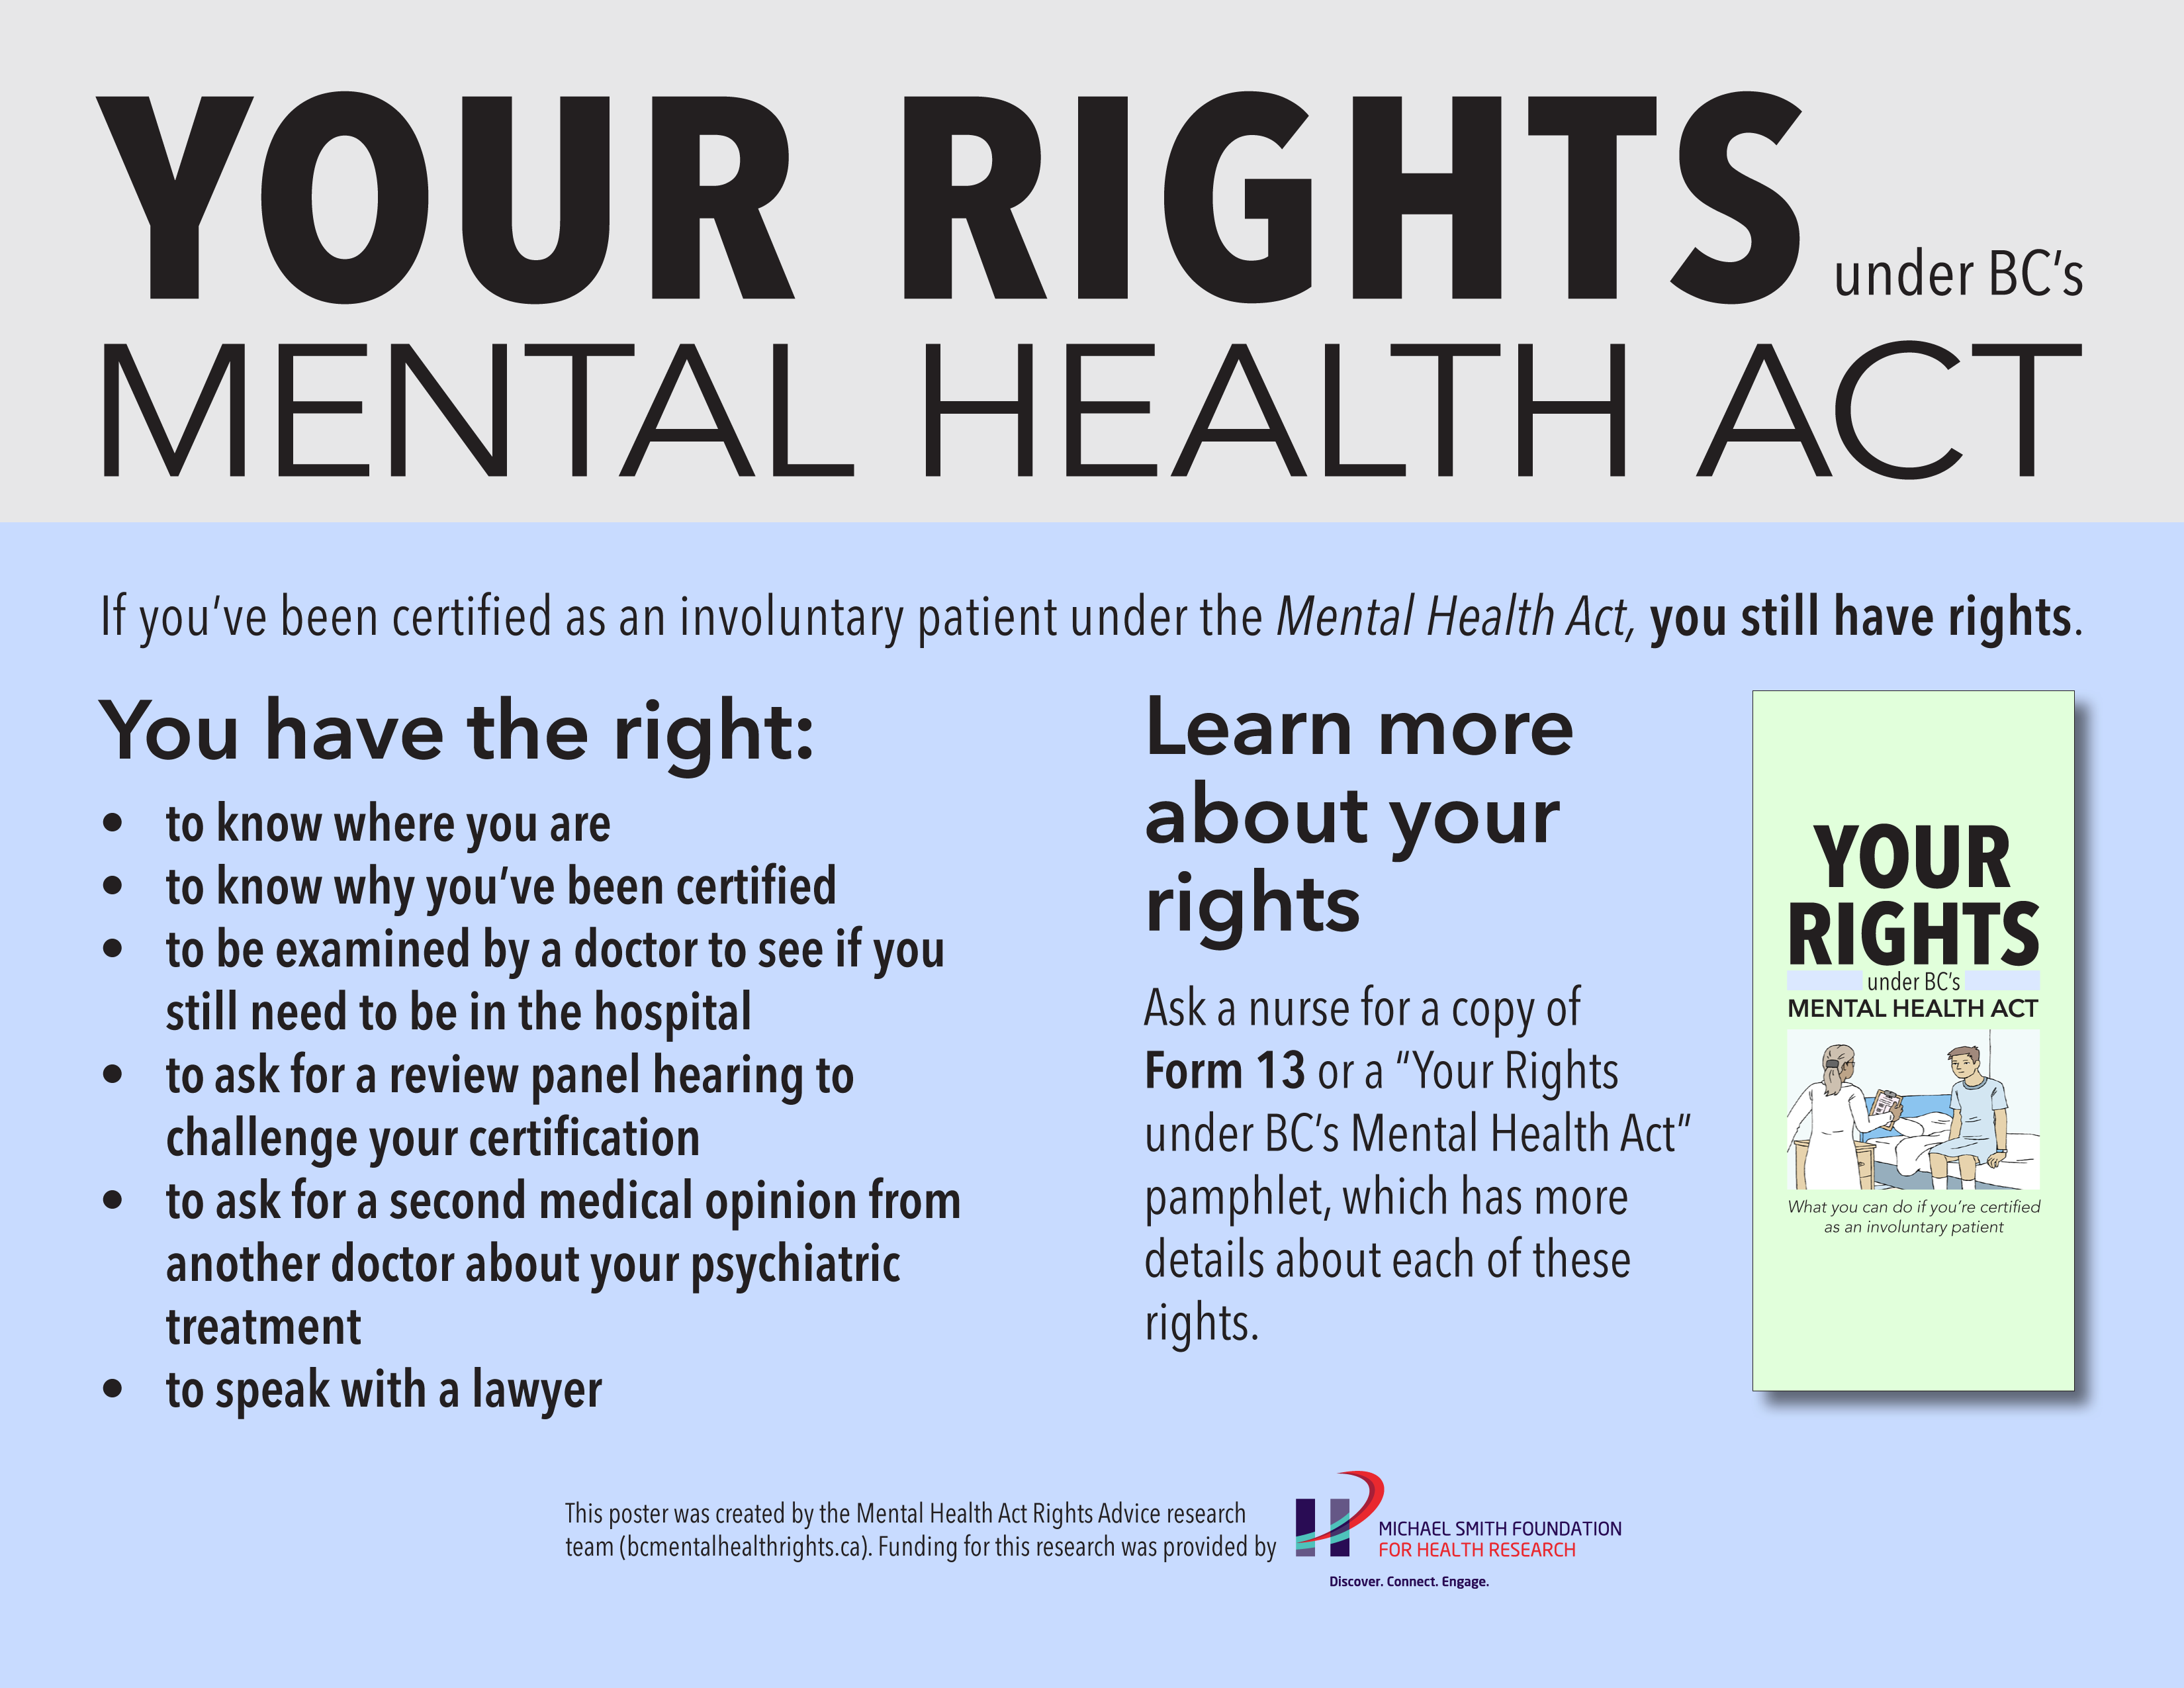 Small poster. Text says, "Your rights under BC's Mental Health Act If you’ve been certified as an involuntary patient under the Mental Health Act, you still have rights. You have the right: to know where you are to know why you’ve been certified to be examined by a doctor to see if you still need to be in the hospital to ask for a review panel hearing to challenge your certification to ask for a second medical opinion from another doctor about your psychiatric treatment to speak with a lawyer Learn more about your rights Ask a nurse for a copy of Form 13 or a “Your Rights under BC’s Mental Health Act” pamphlet, which has more details about each of these rights. [Image of the front of the pamphlet]. This poster was created by the Mental Health Act Rights Advice research team (bcmentalhealthrights.ca). Funding for this research was provided by the Michael Smith Foundation for Health Research." [Image of the Michael Smith Foundation for Health Research logo]